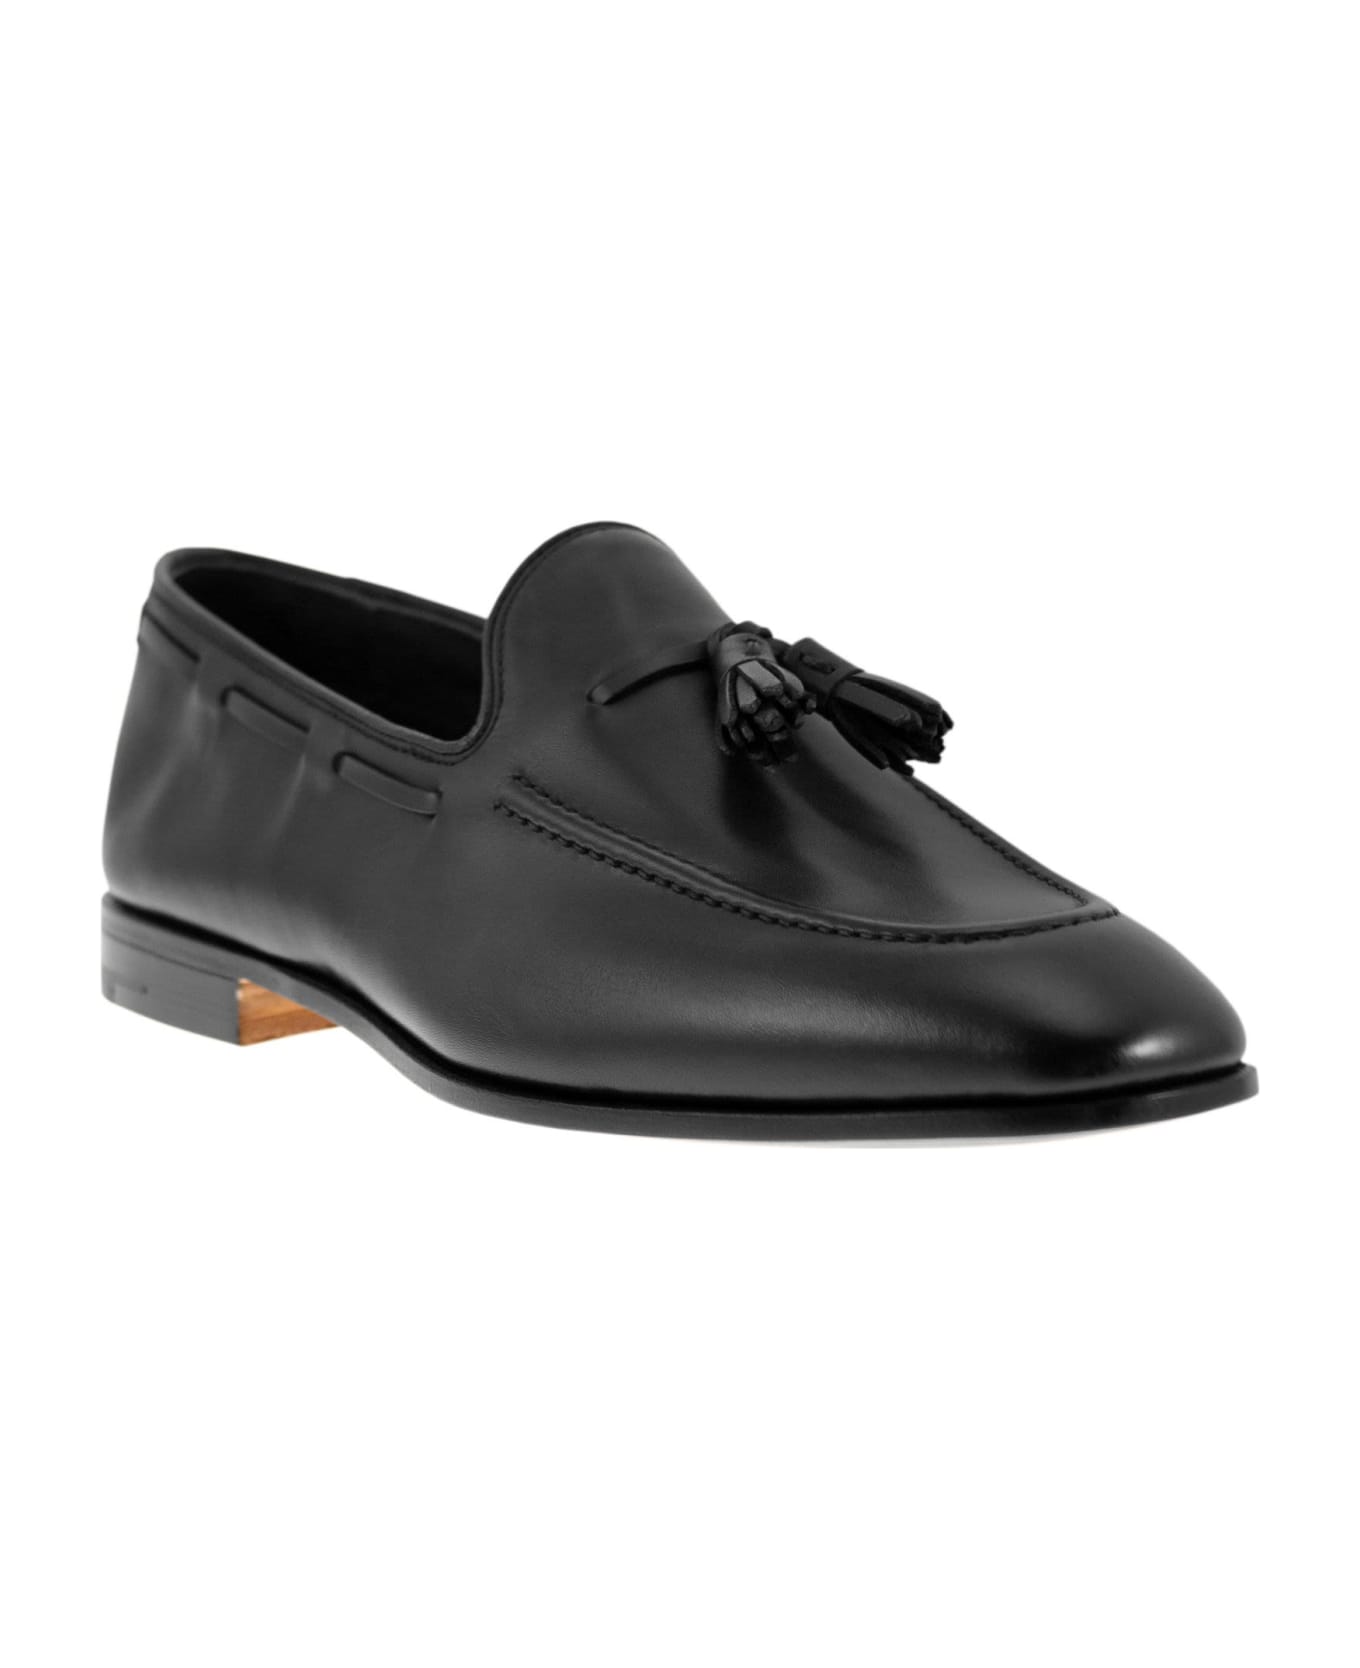 Church's Maidstone Loafer - Black